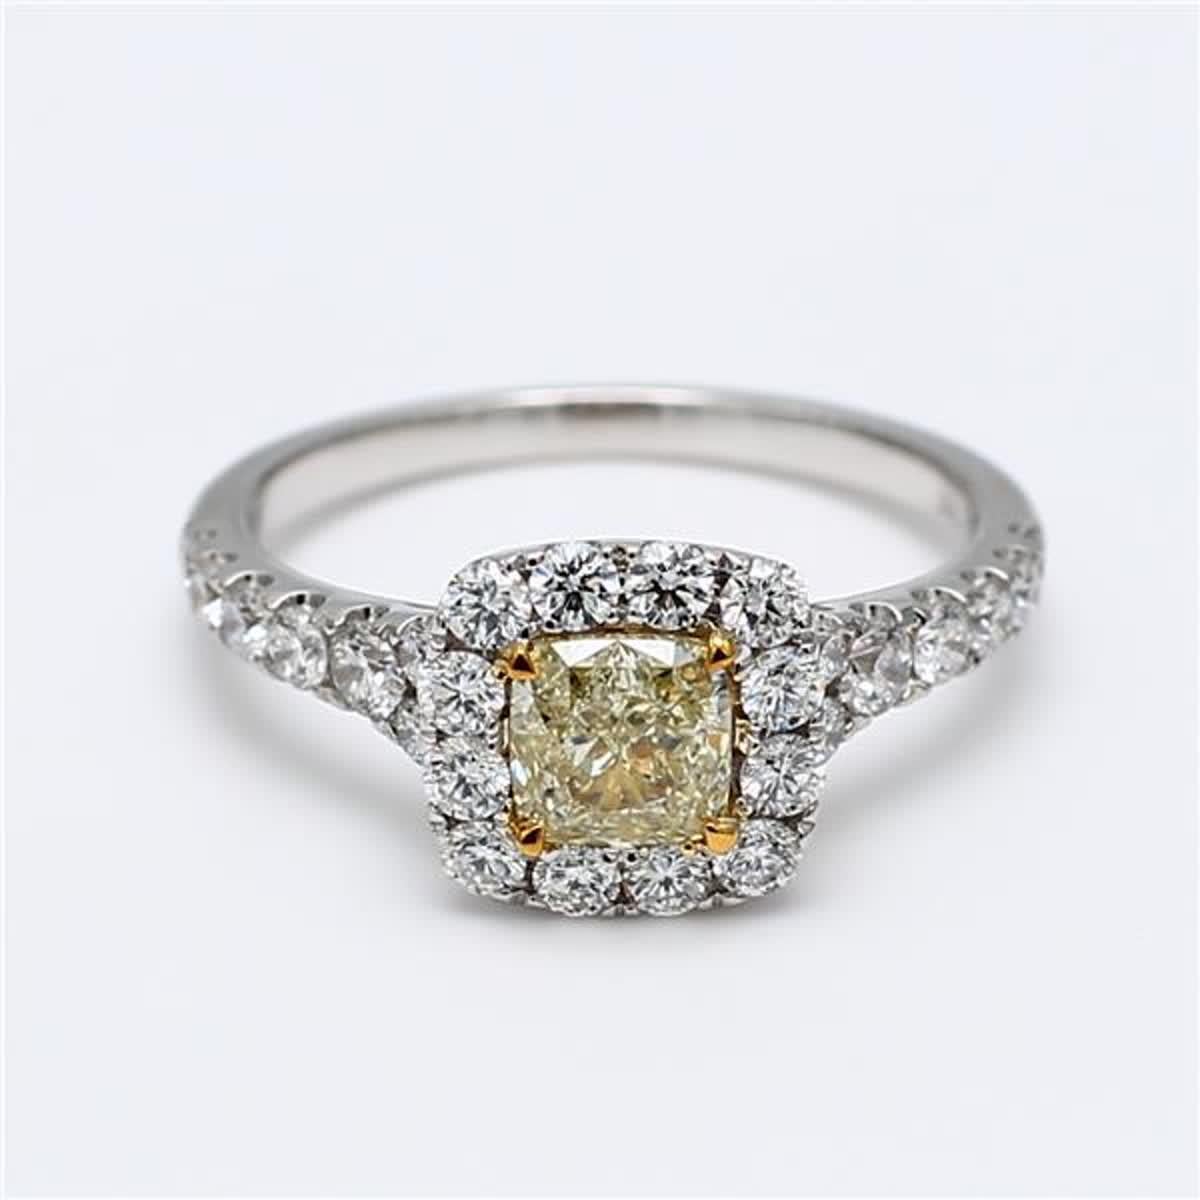 RareGemWorld's classic GIA certified diamond ring. Mounted in a beautiful 18K Yellow and White Gold setting with a natural cushion cut yellow diamond. The yellow diamond is surrounded by small round natural white diamond melee. This ring is